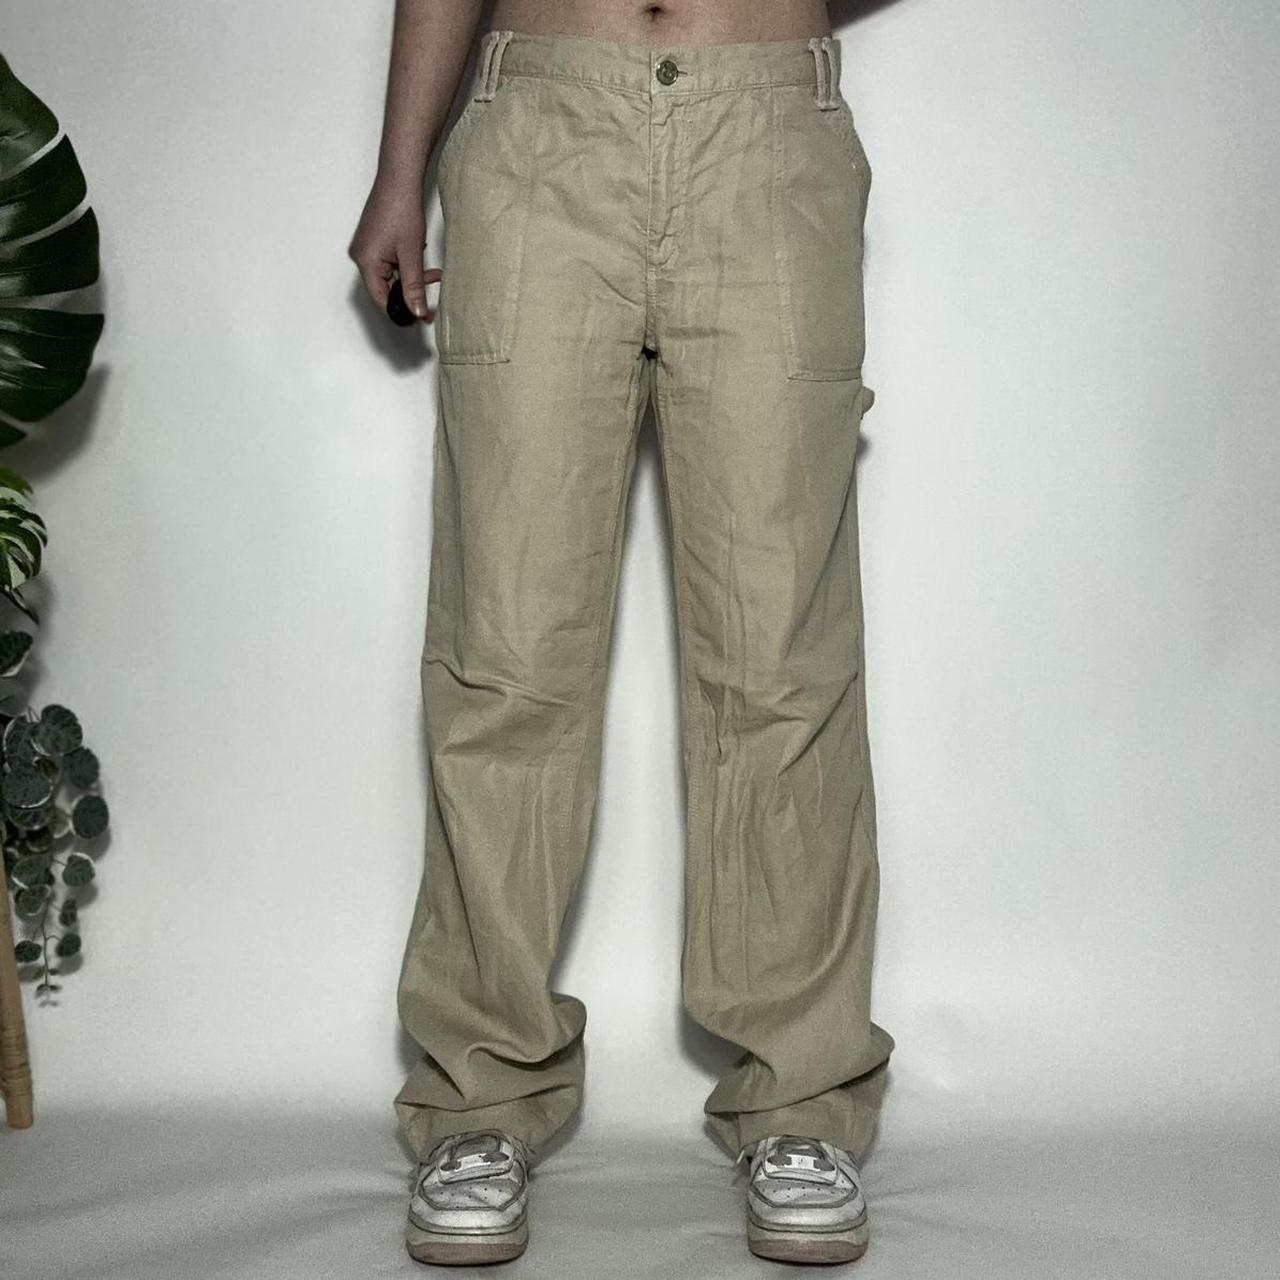 Vintage 90s high-waisted wide-leg tan cargoes